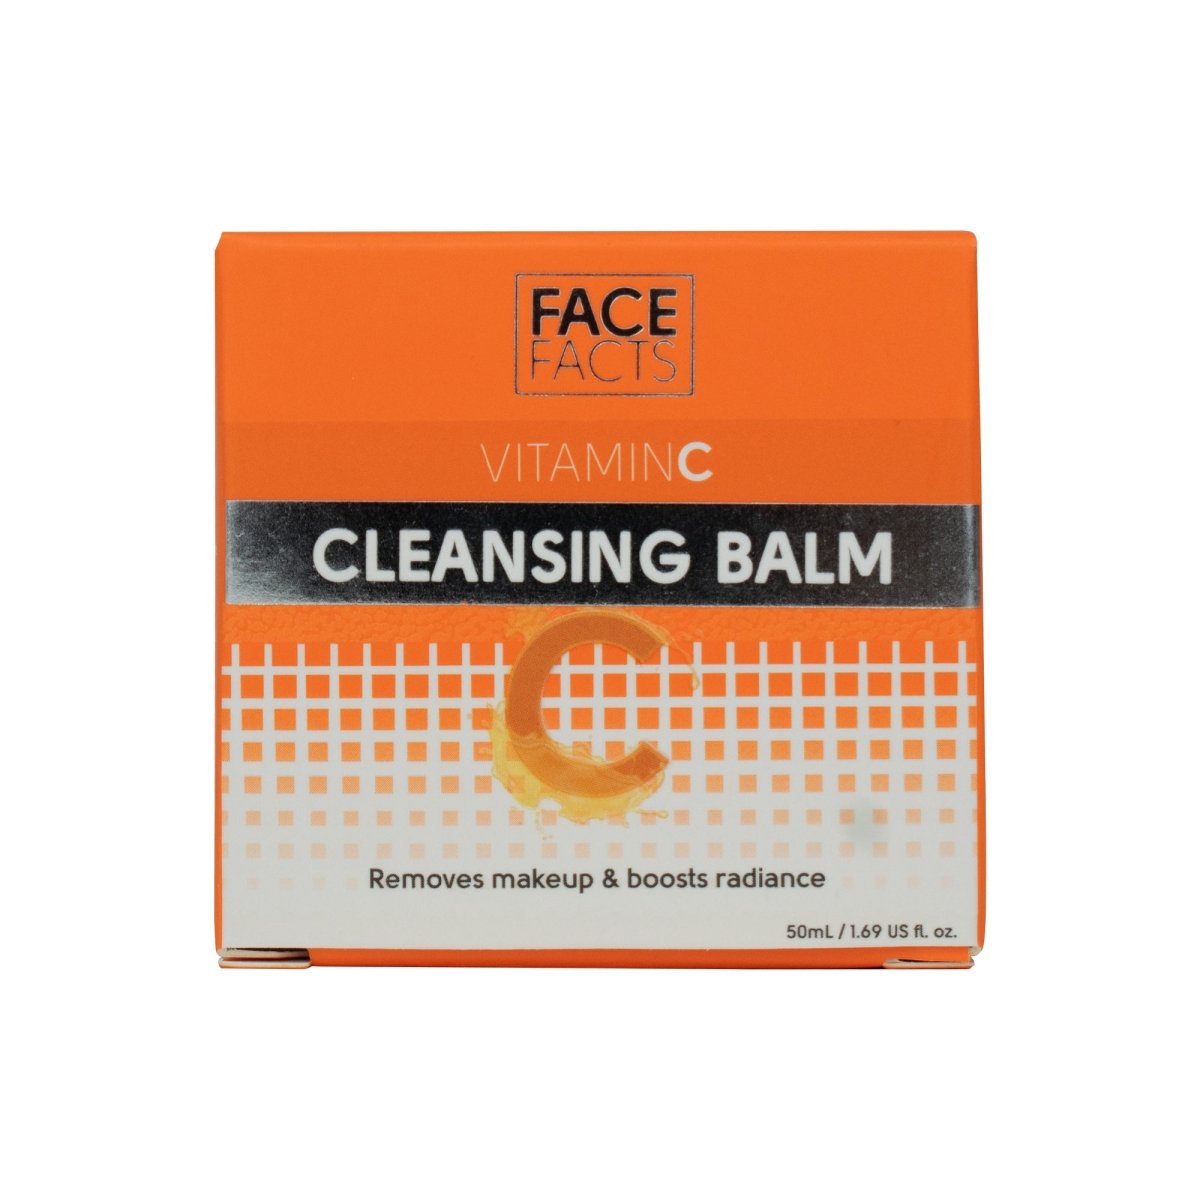 Face Facts Vitamin C Cleansing Balm - Intamarque - Wholesale 5031413930900